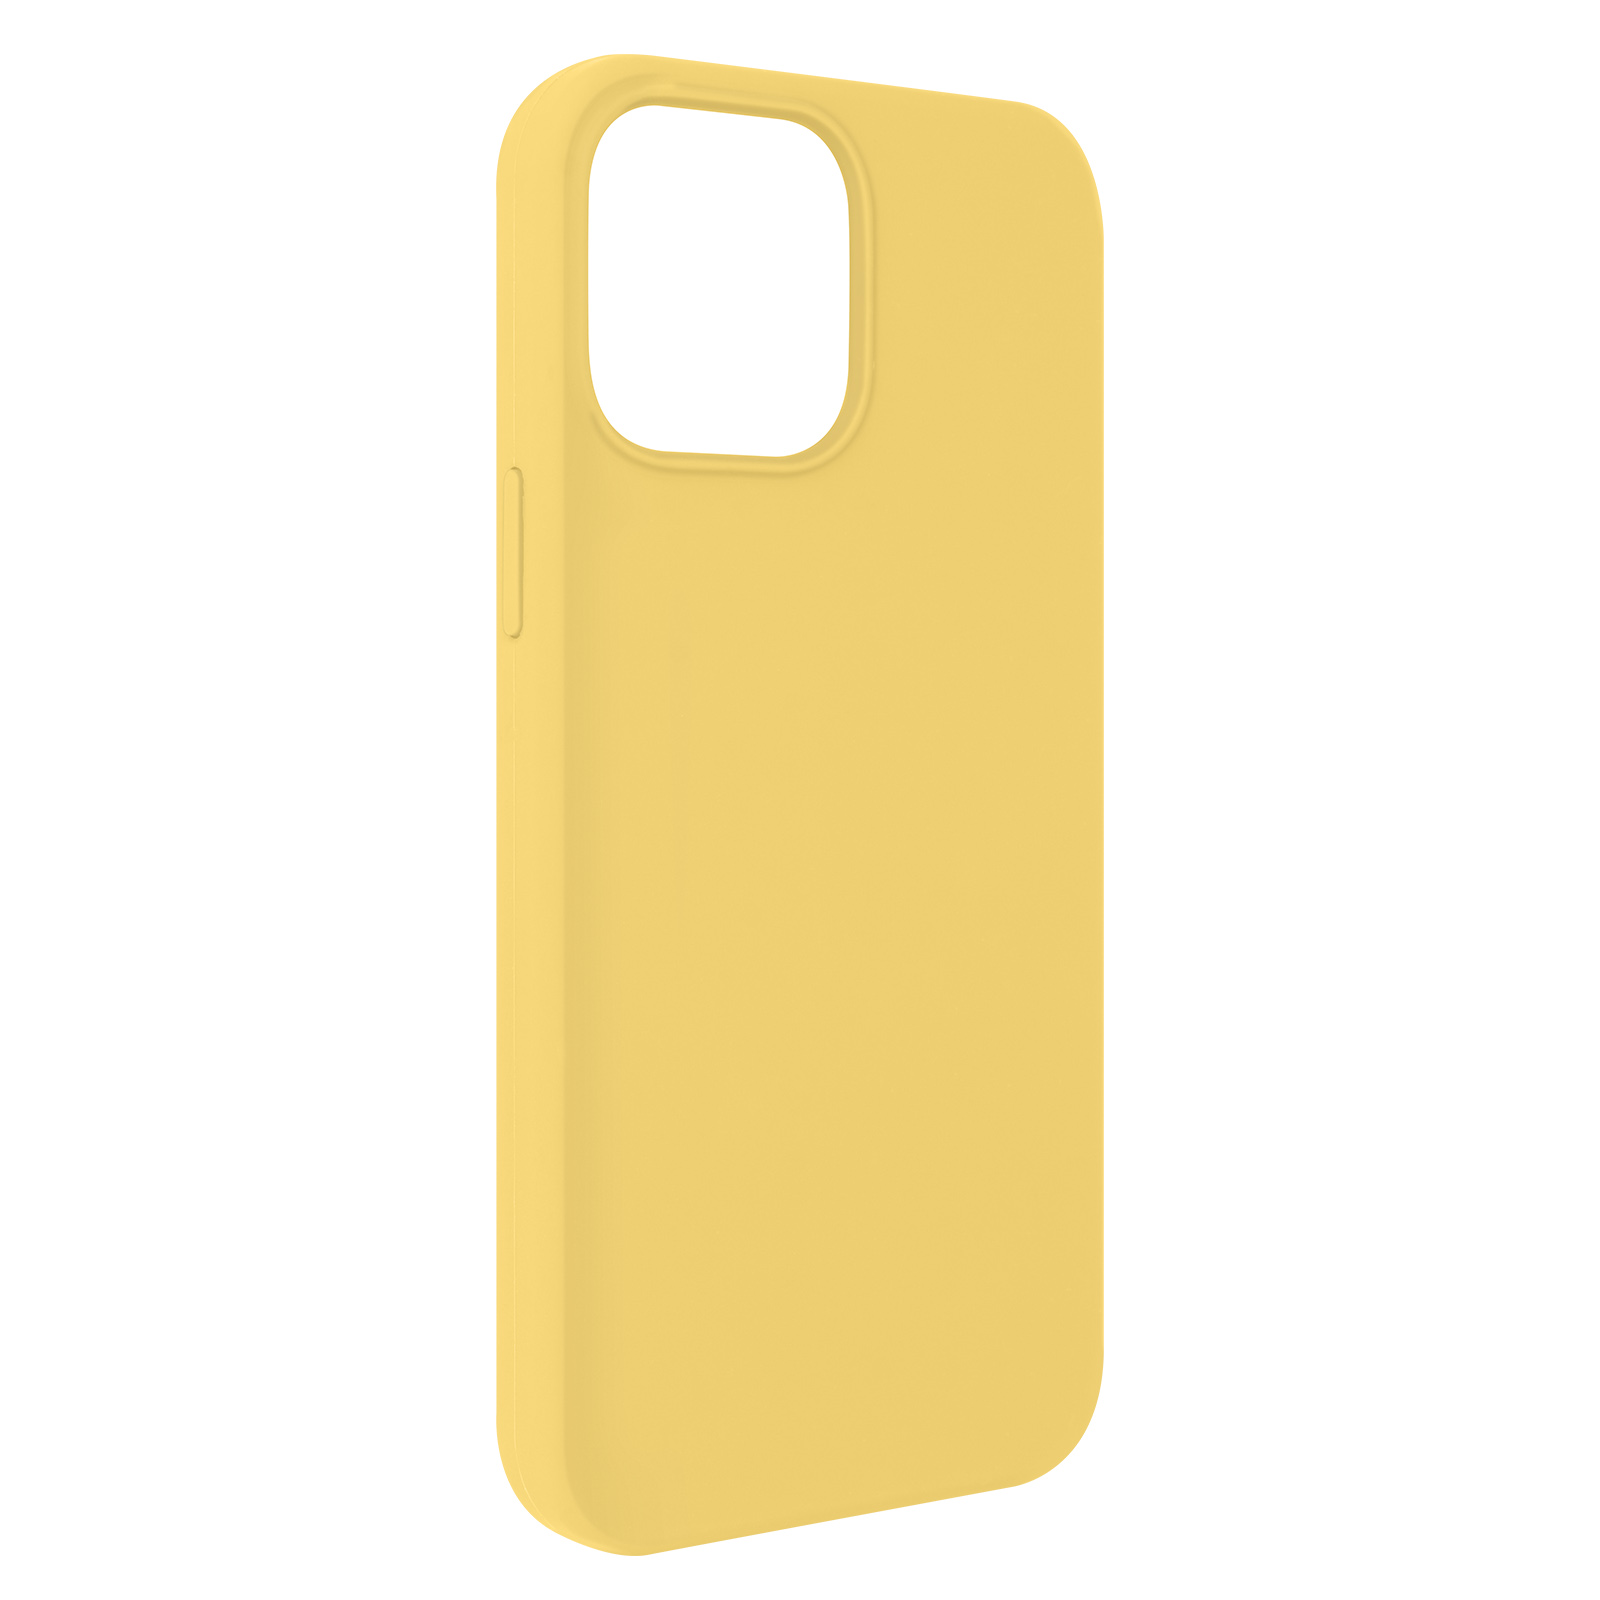 Max, Pro Gelb AVIZAR 13 Backcover, Apple, iPhone Likid Series,